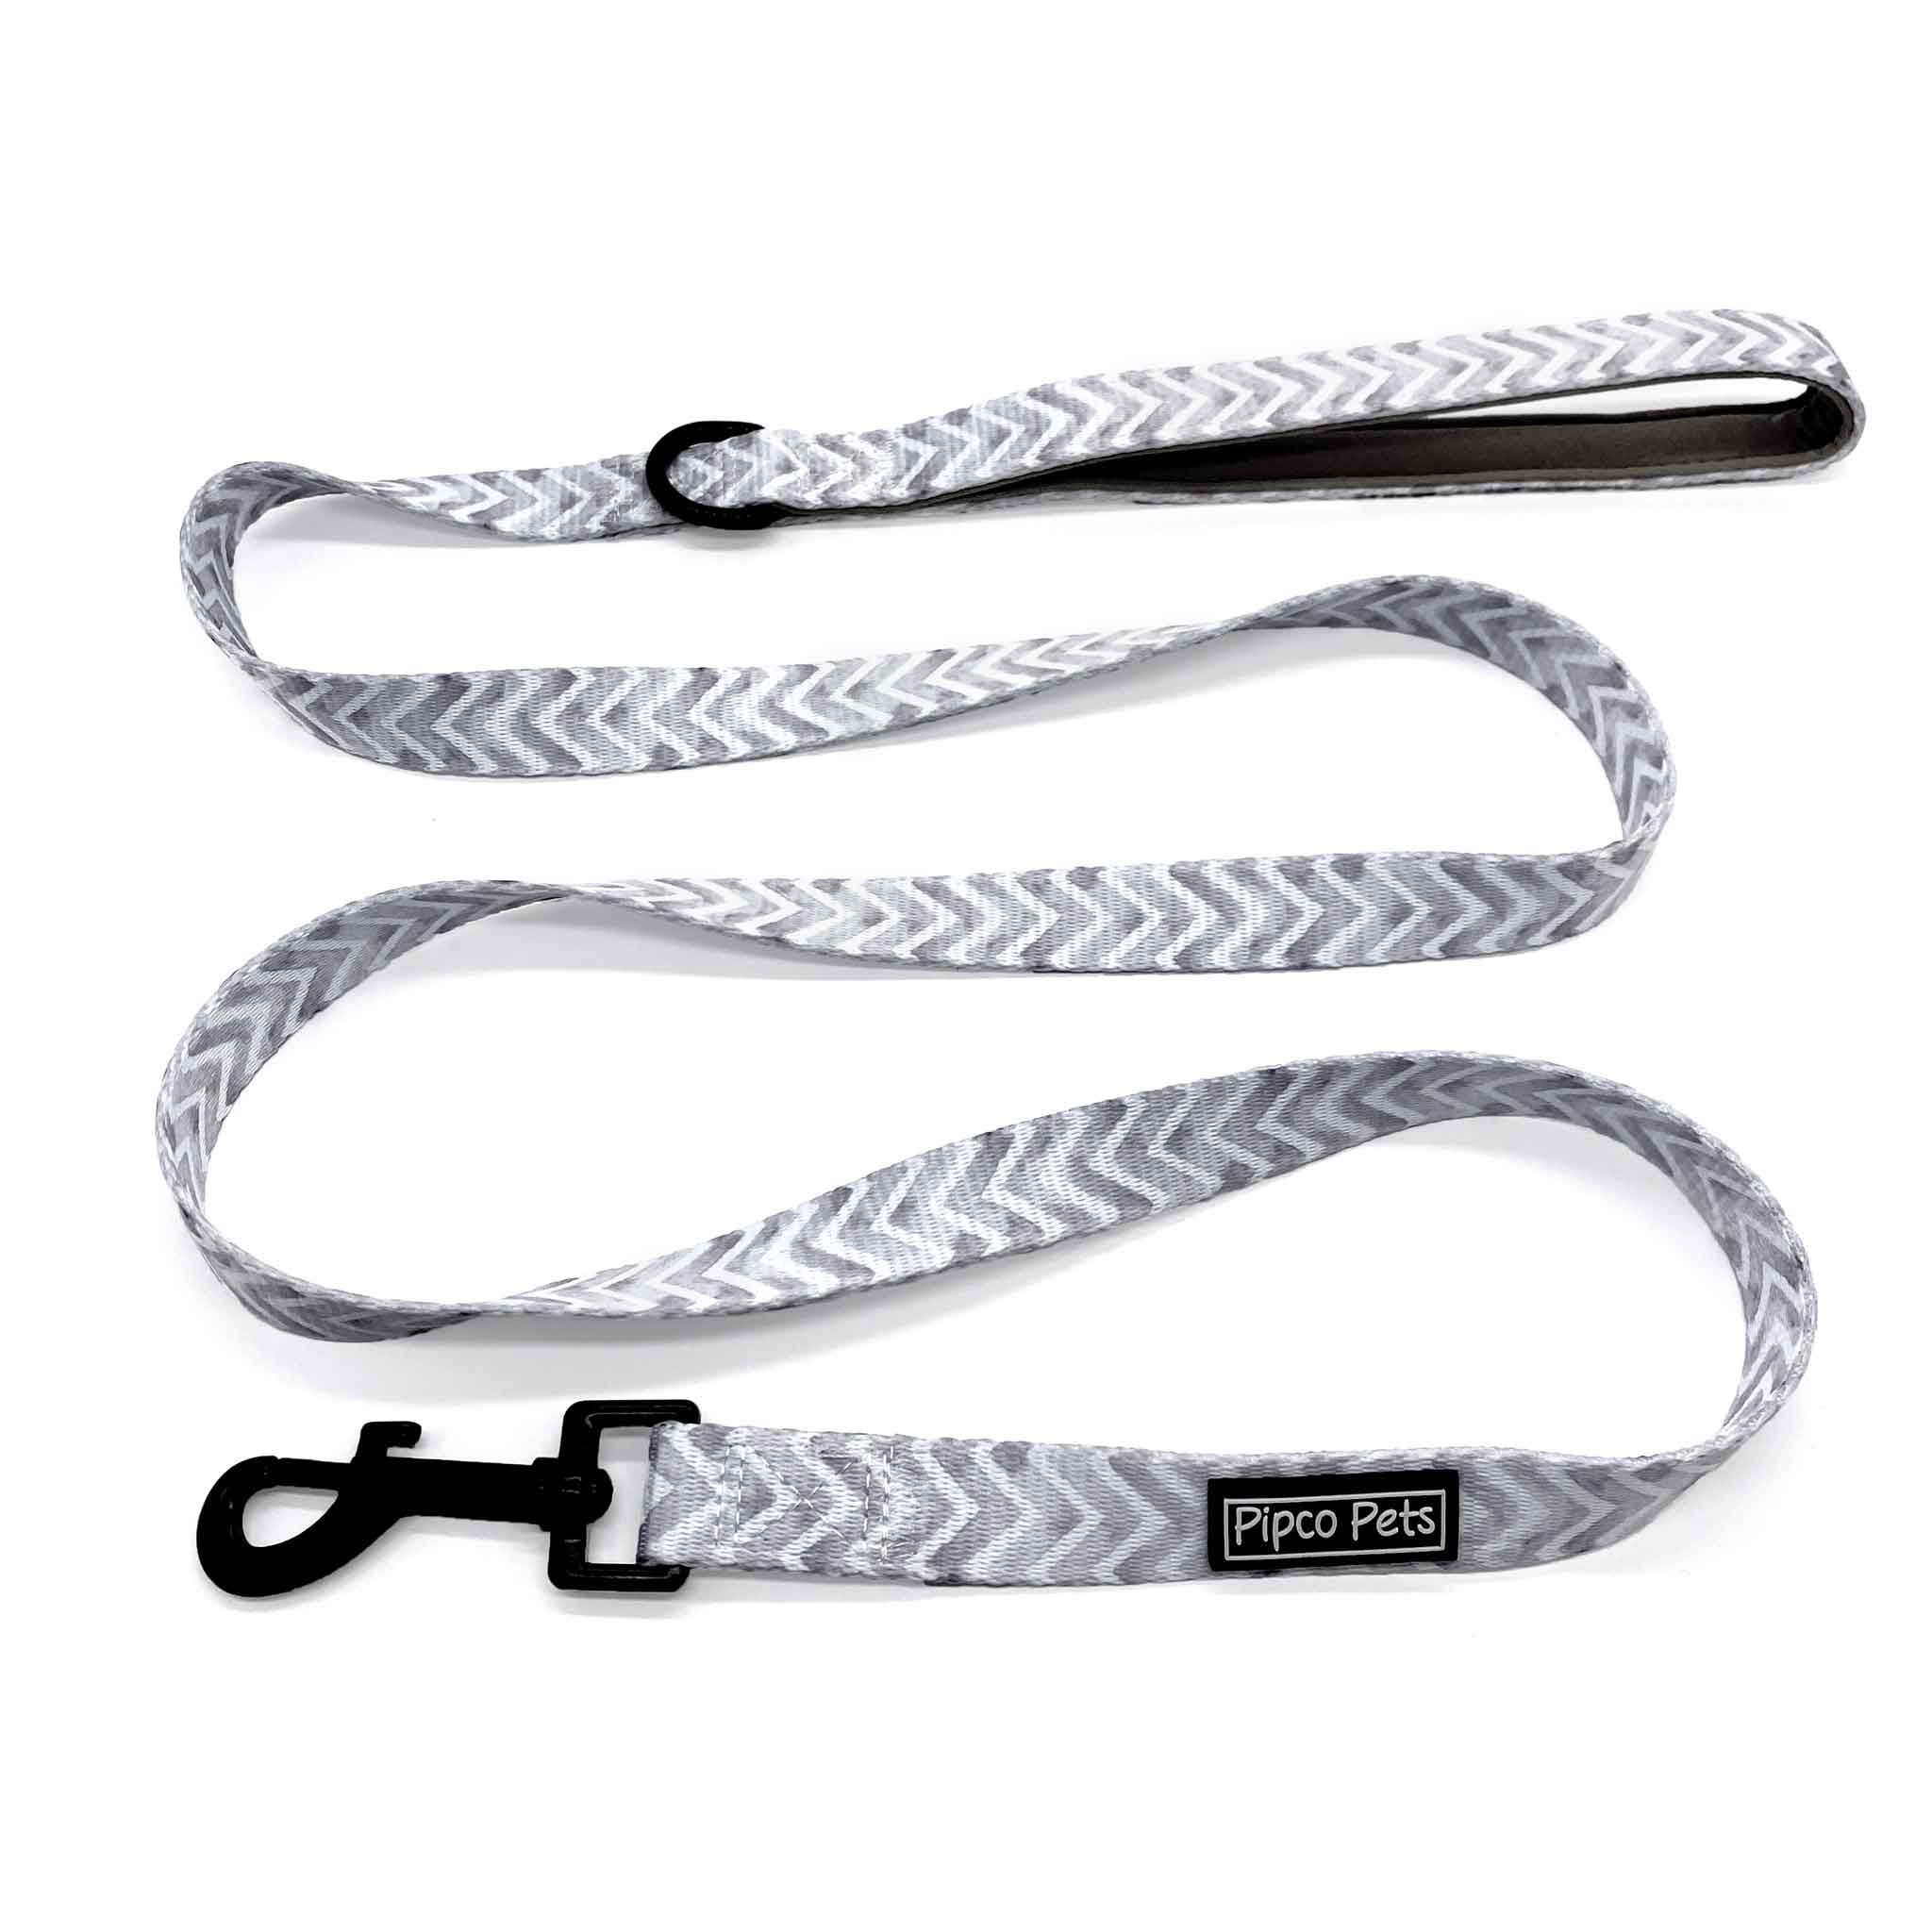 Pipco Pets dog leash with grey Zig Zags pattern